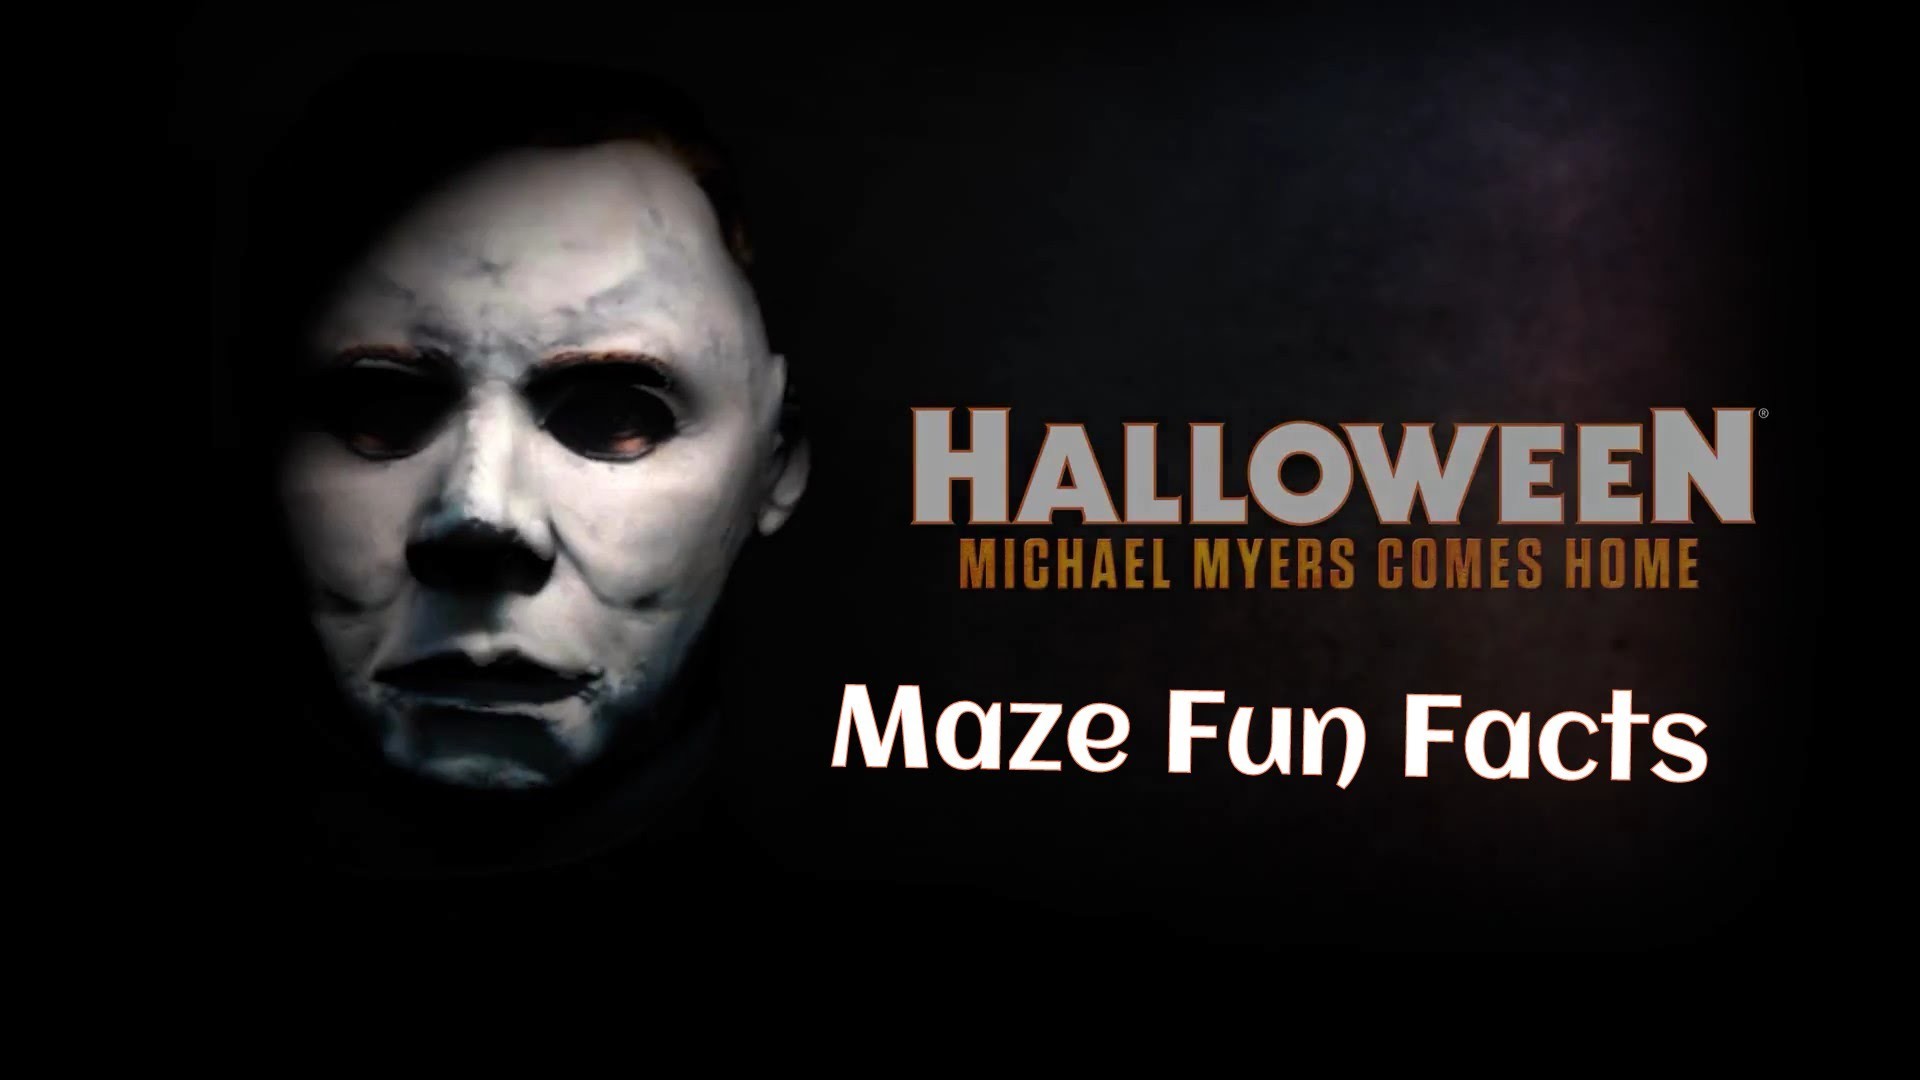 Halloween Michael Myers Comes Home to Halloween Horror Nights 2015 Maze Fun Facts